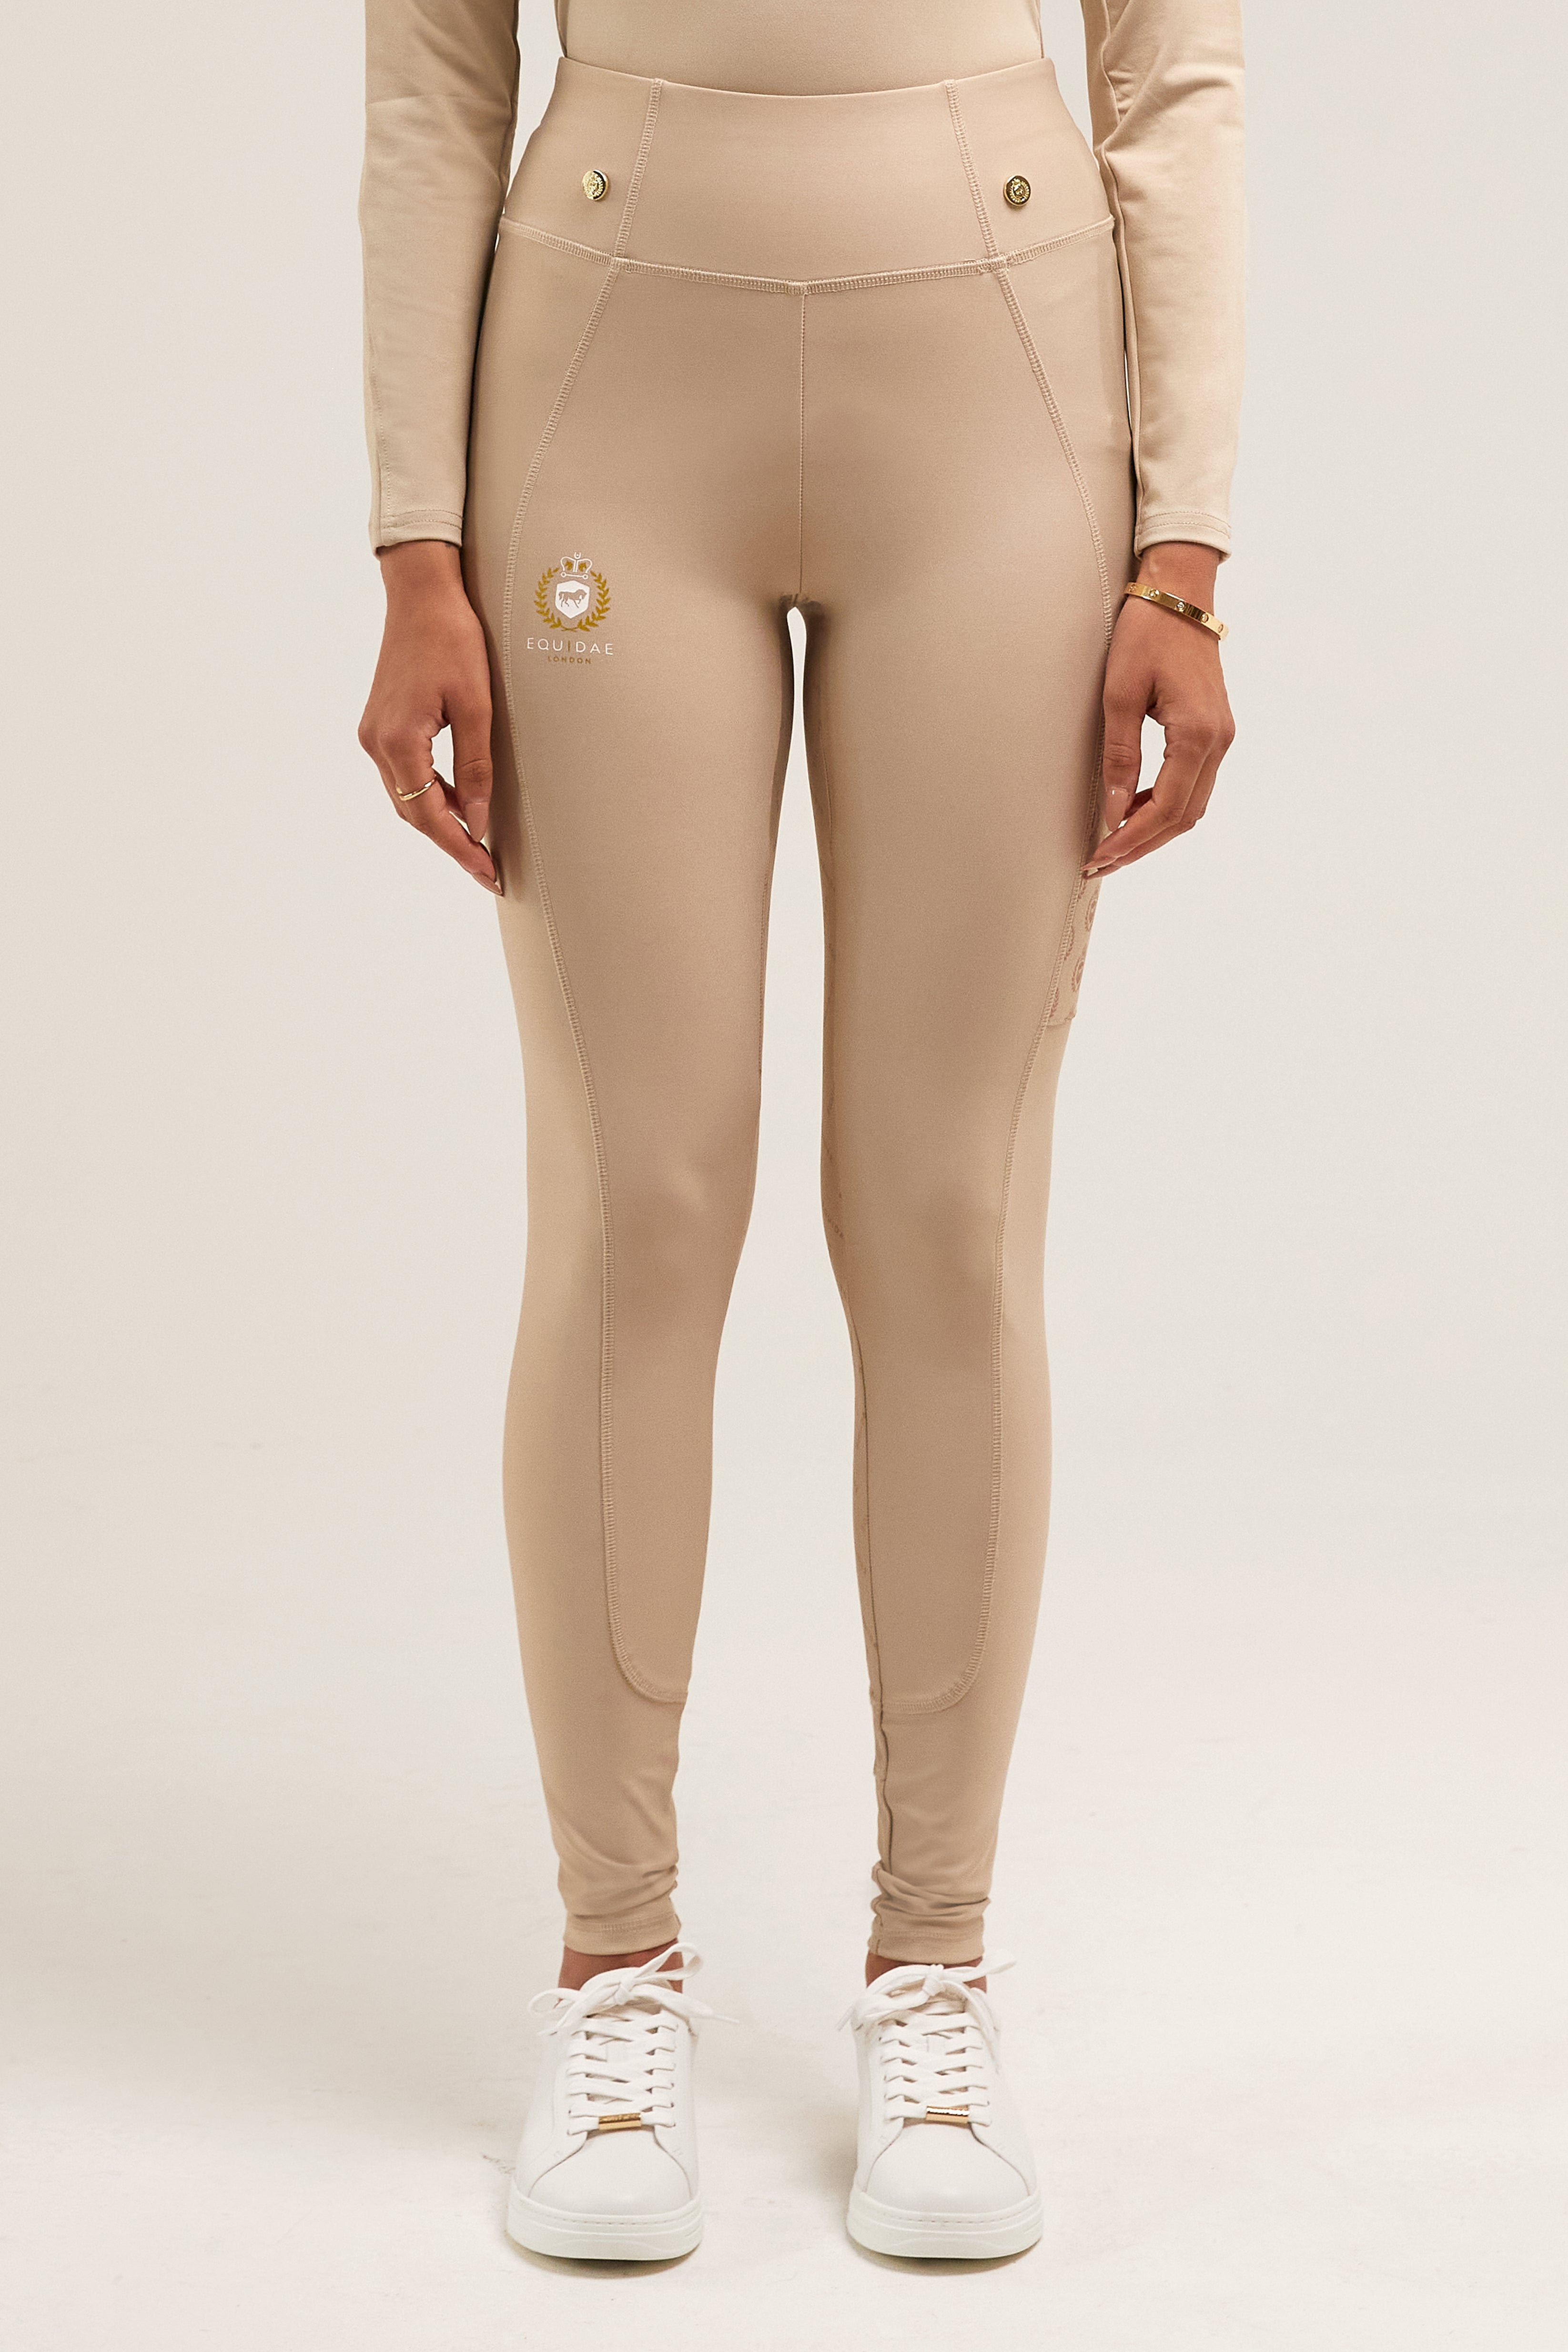 Nike Air Ribbed Light Beige High Waisted leggings in Natural